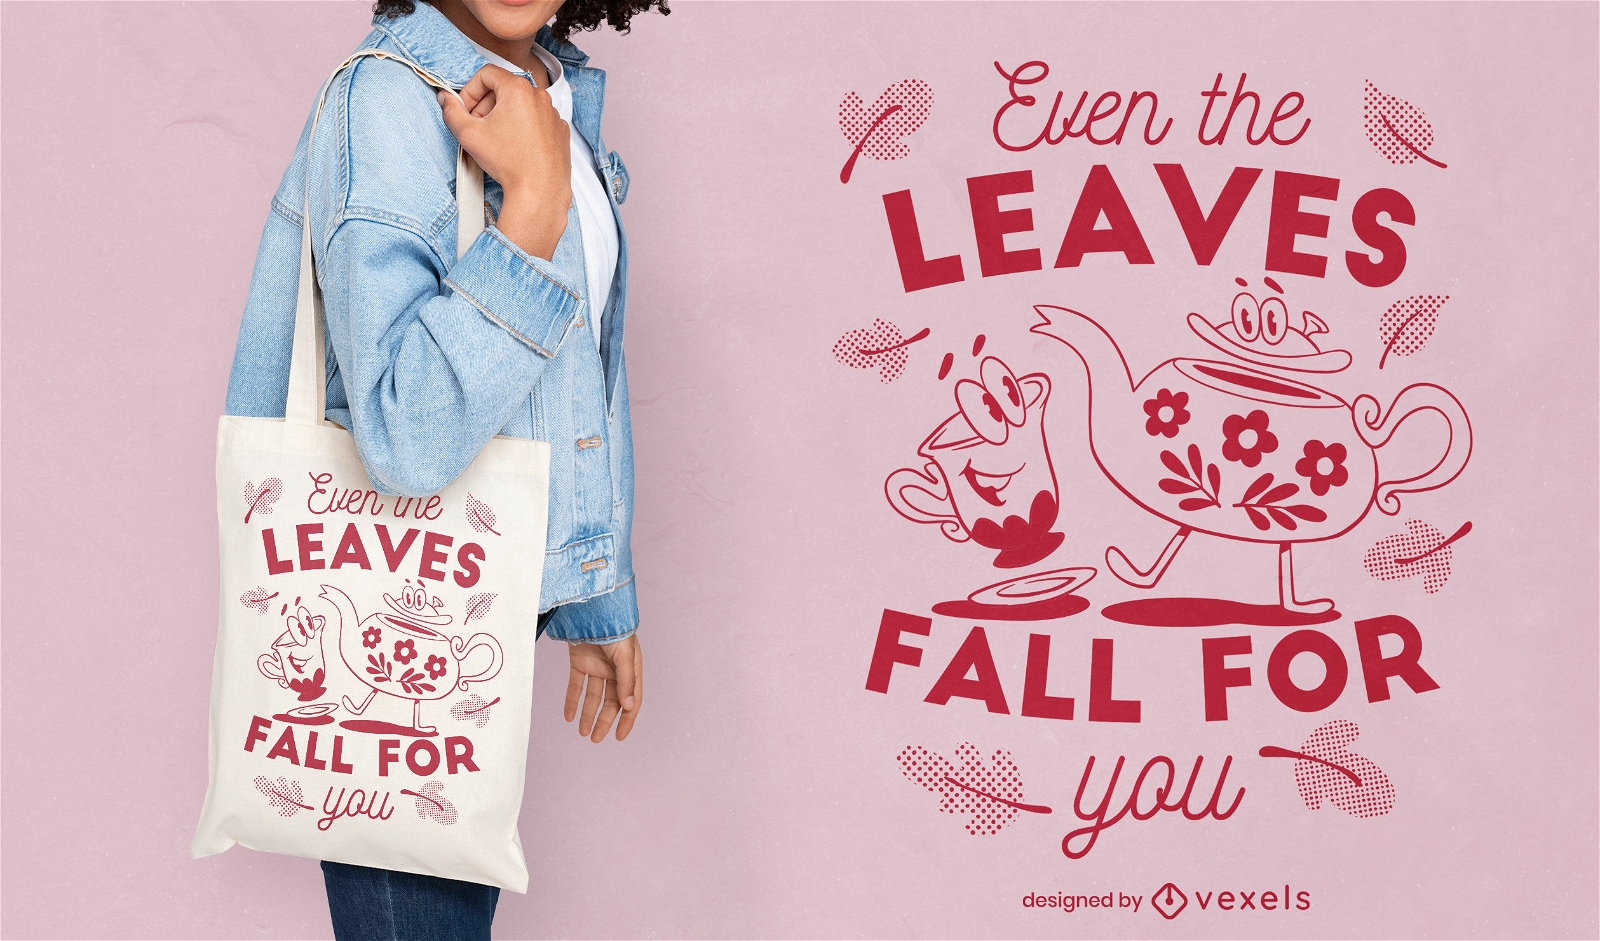 Even the leaves fall for you tote bag design